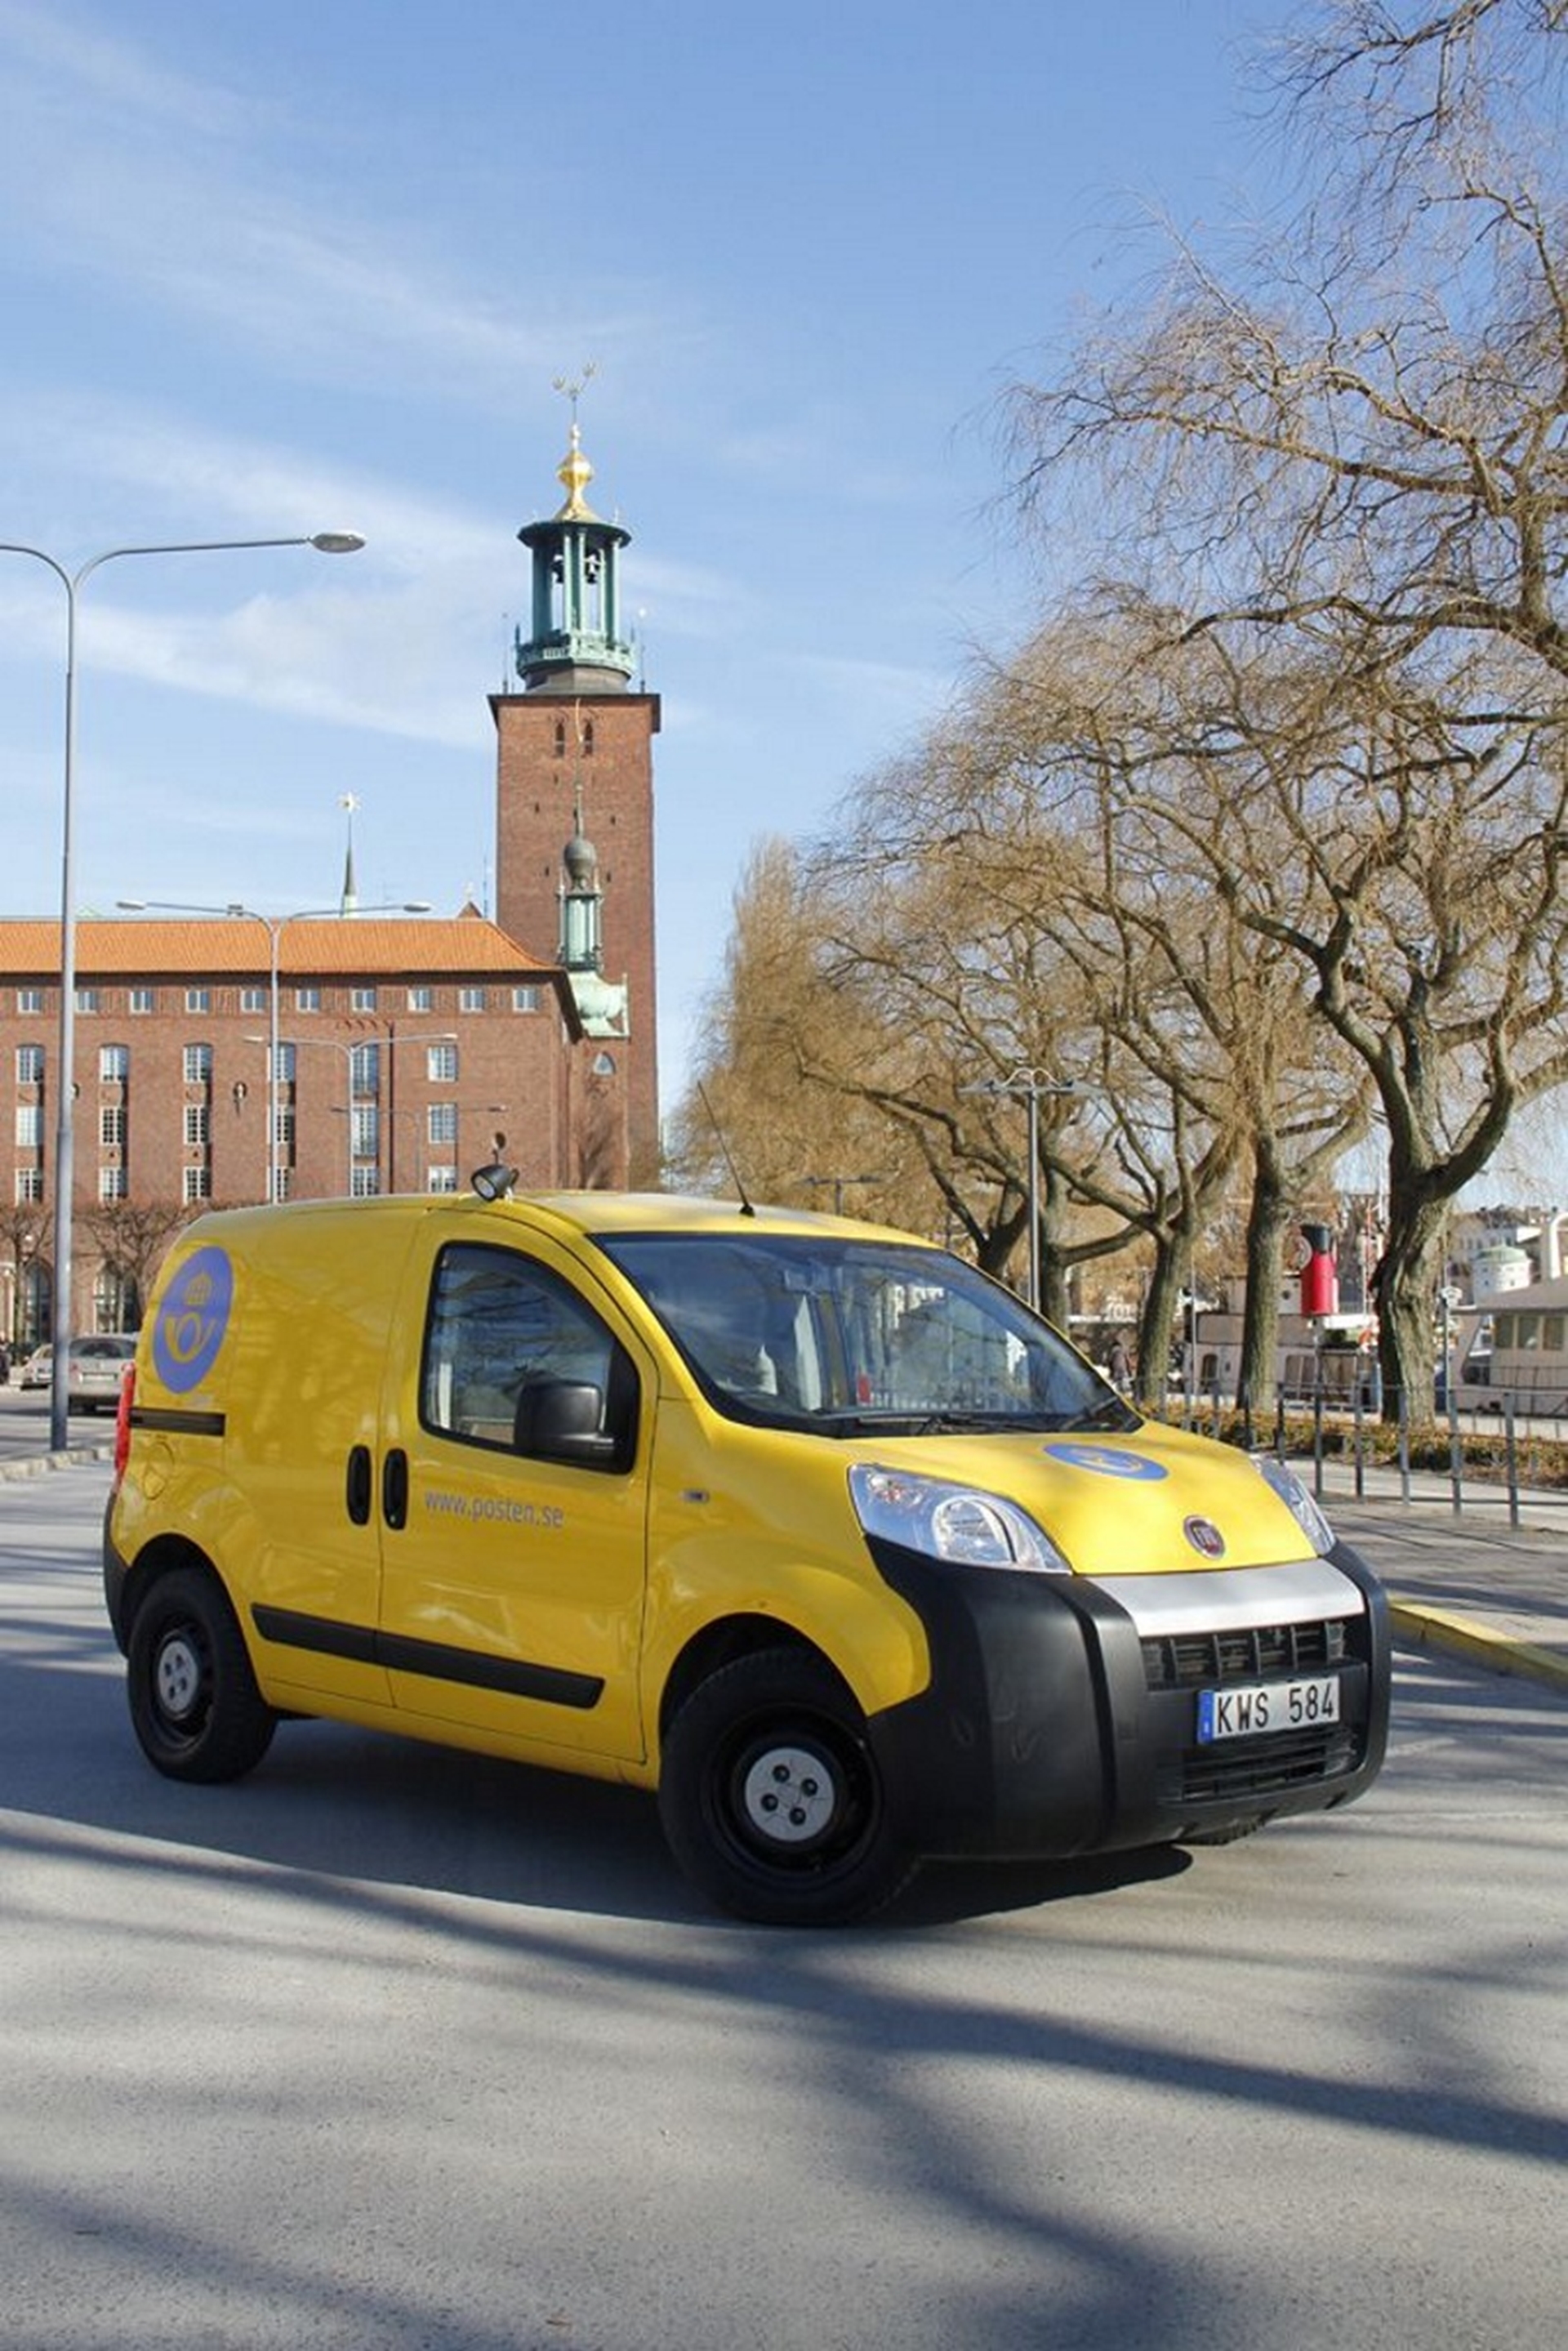 Swedish Mail continues to travel on board the Fiat Fiorino